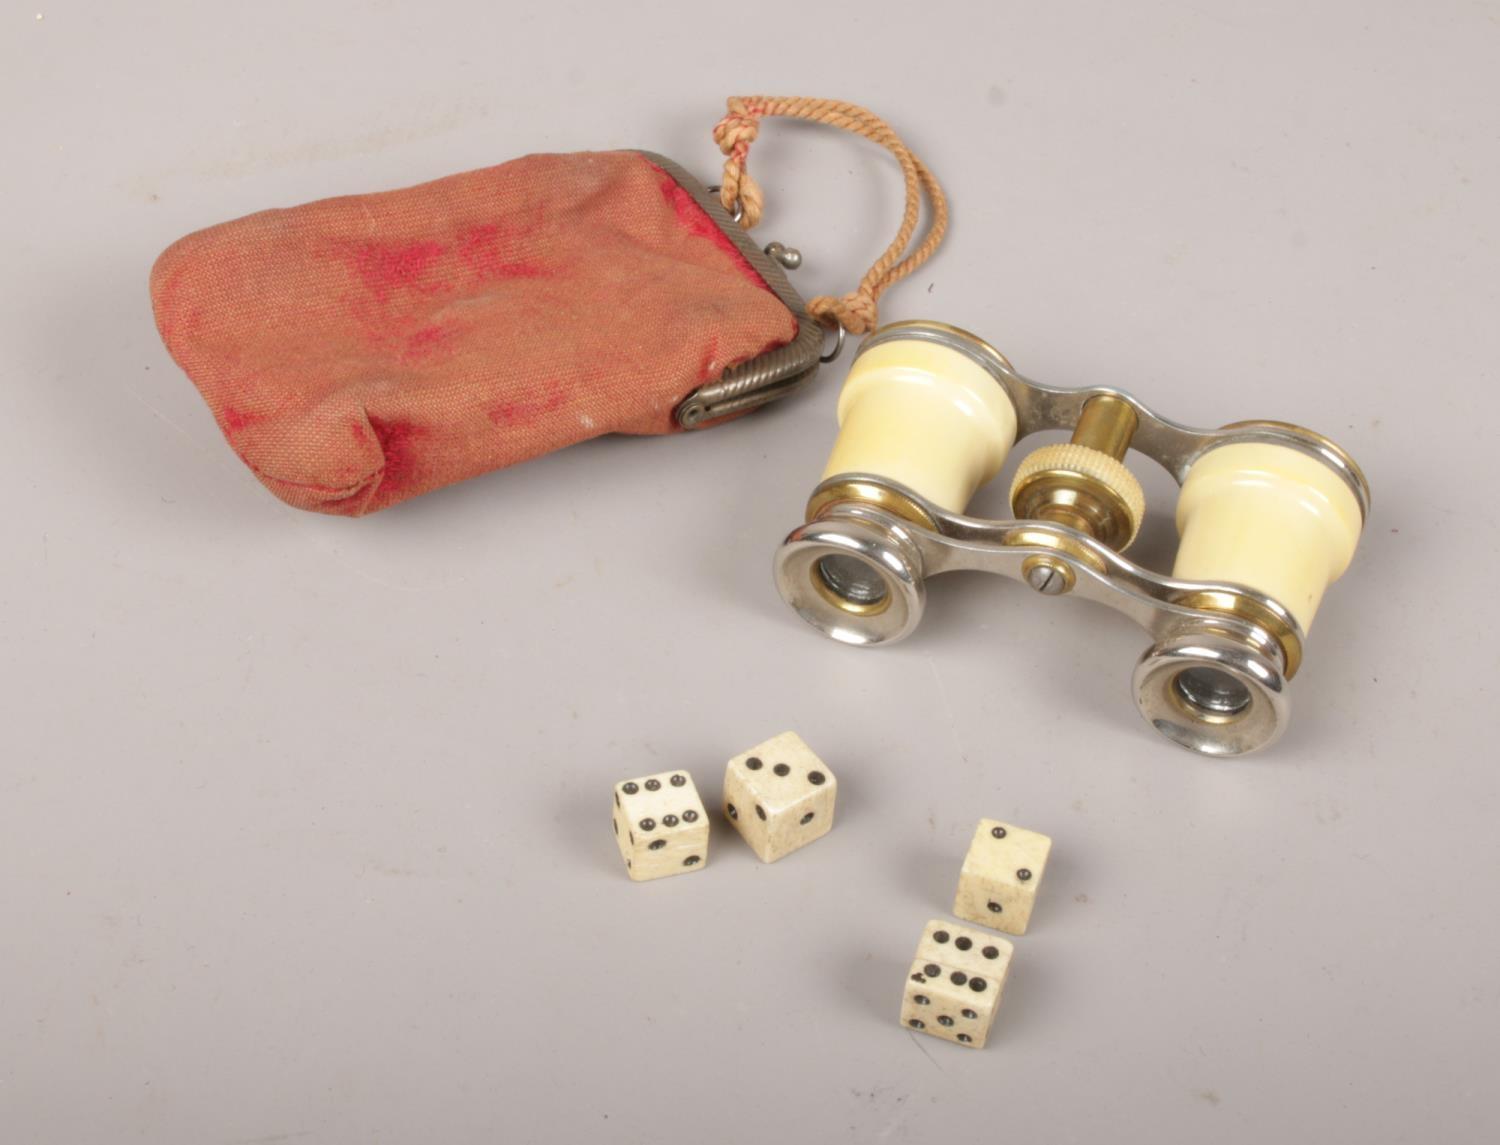 Vintage opera glasses with fabric purse to include four bone dice.